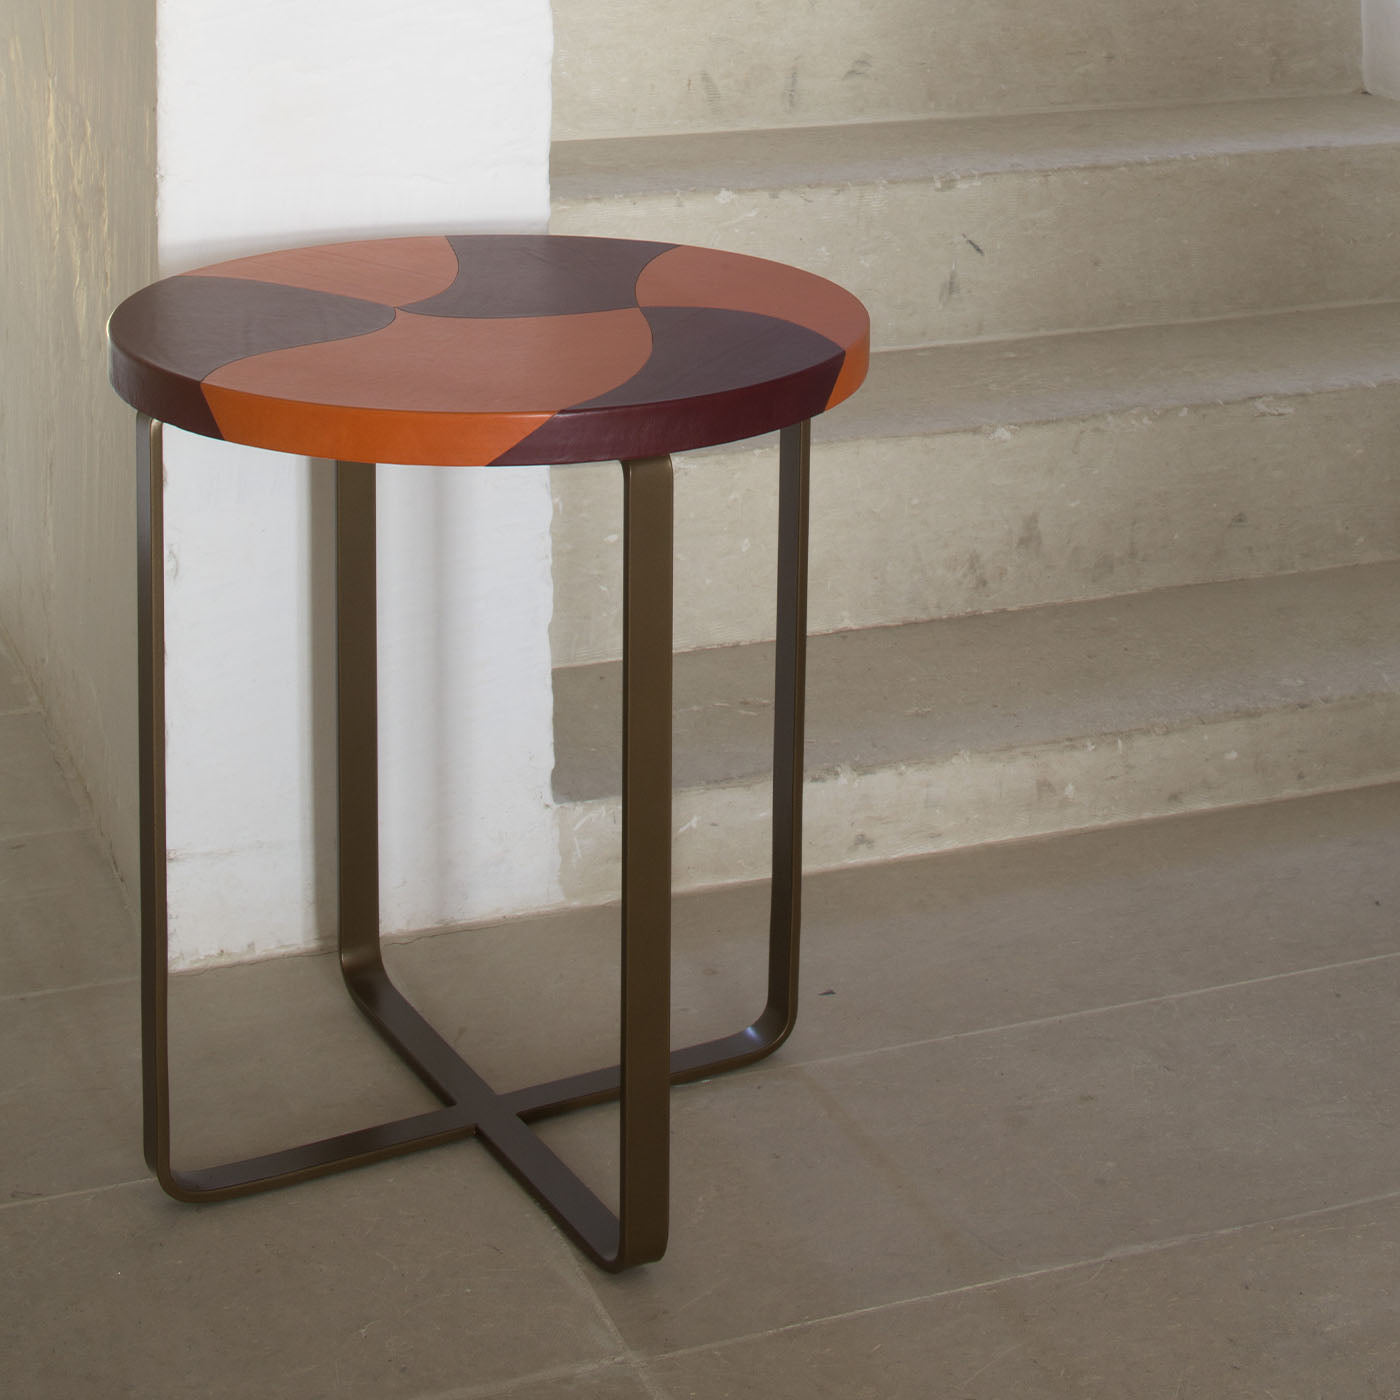 Isole Tigre Round Polychrome Side Table by Nestor Perkal - Alternative view 1